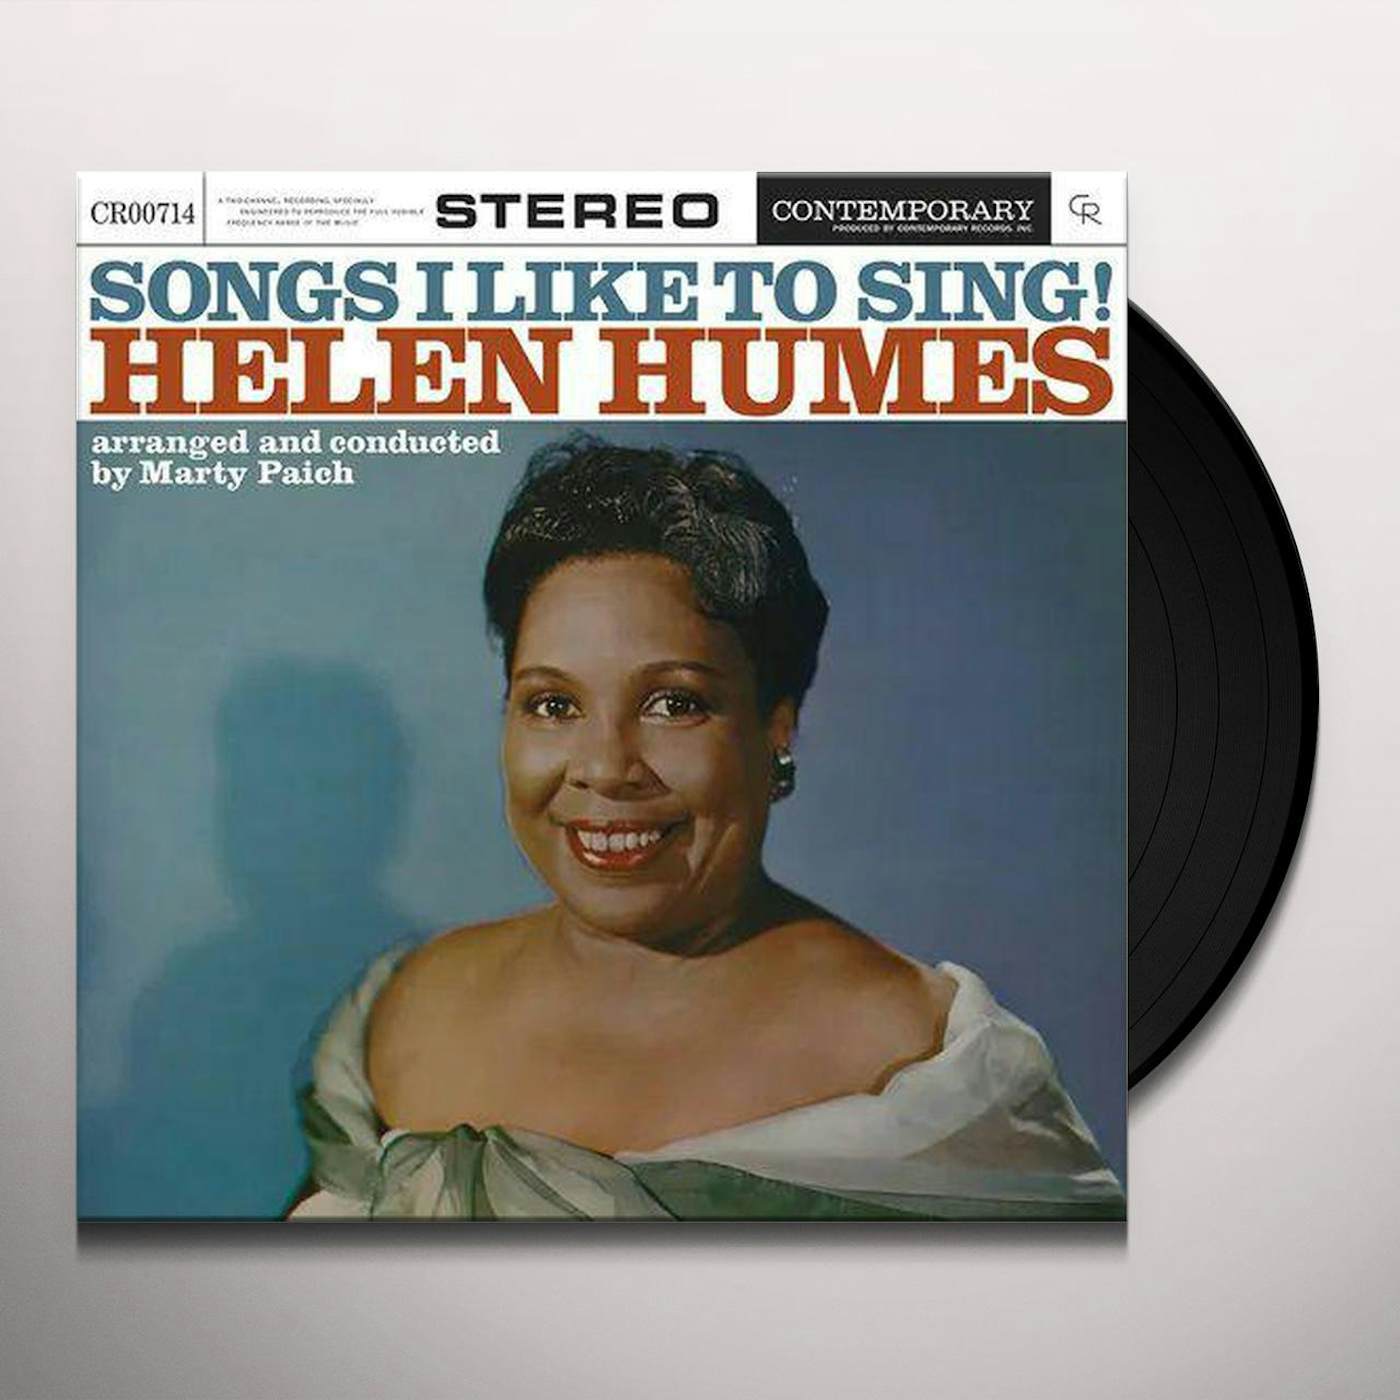 Helen Humes Songs I Like To Sing (Contemporary Records) Vinyl Record